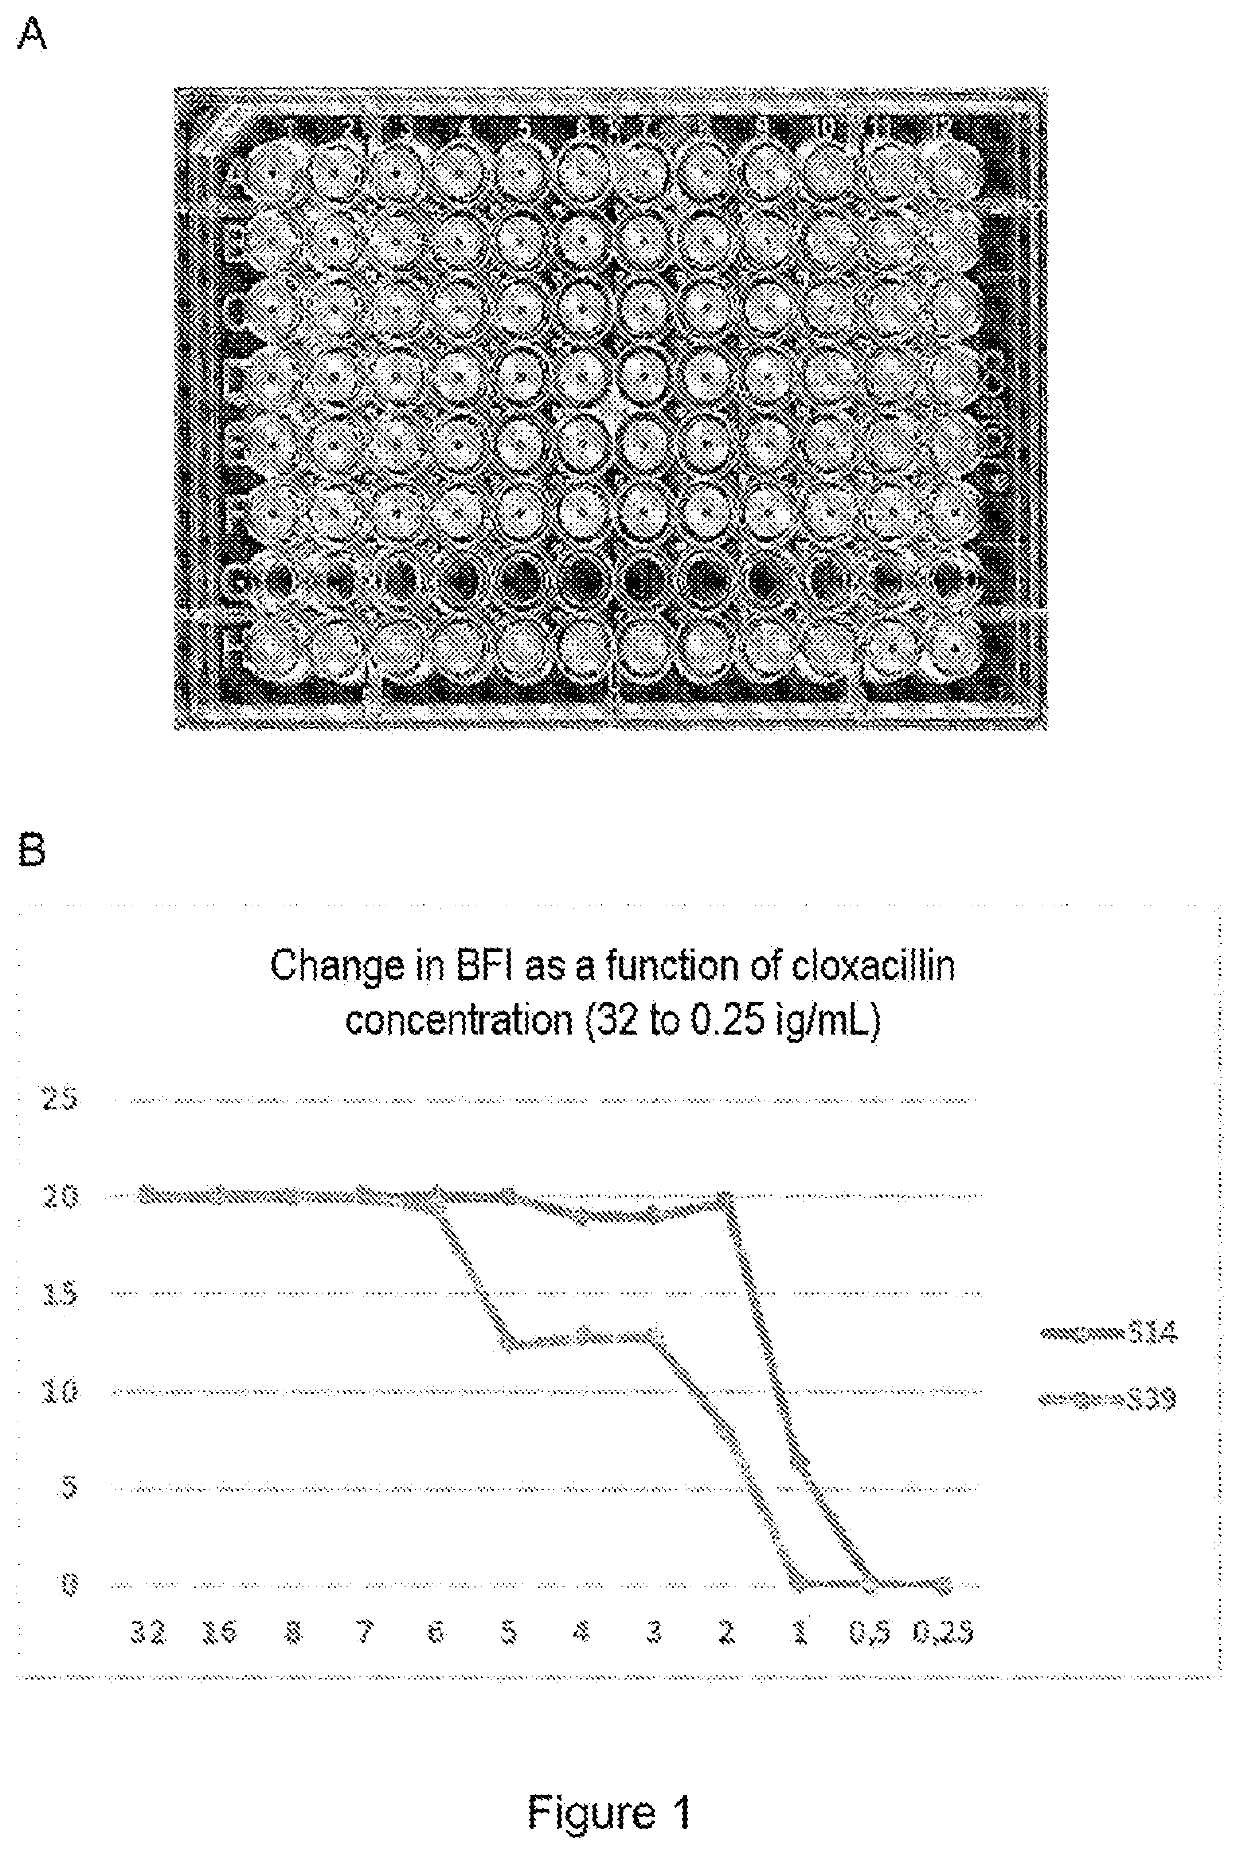 Use of cloxacillin to inhibit/prevent biofilm formation